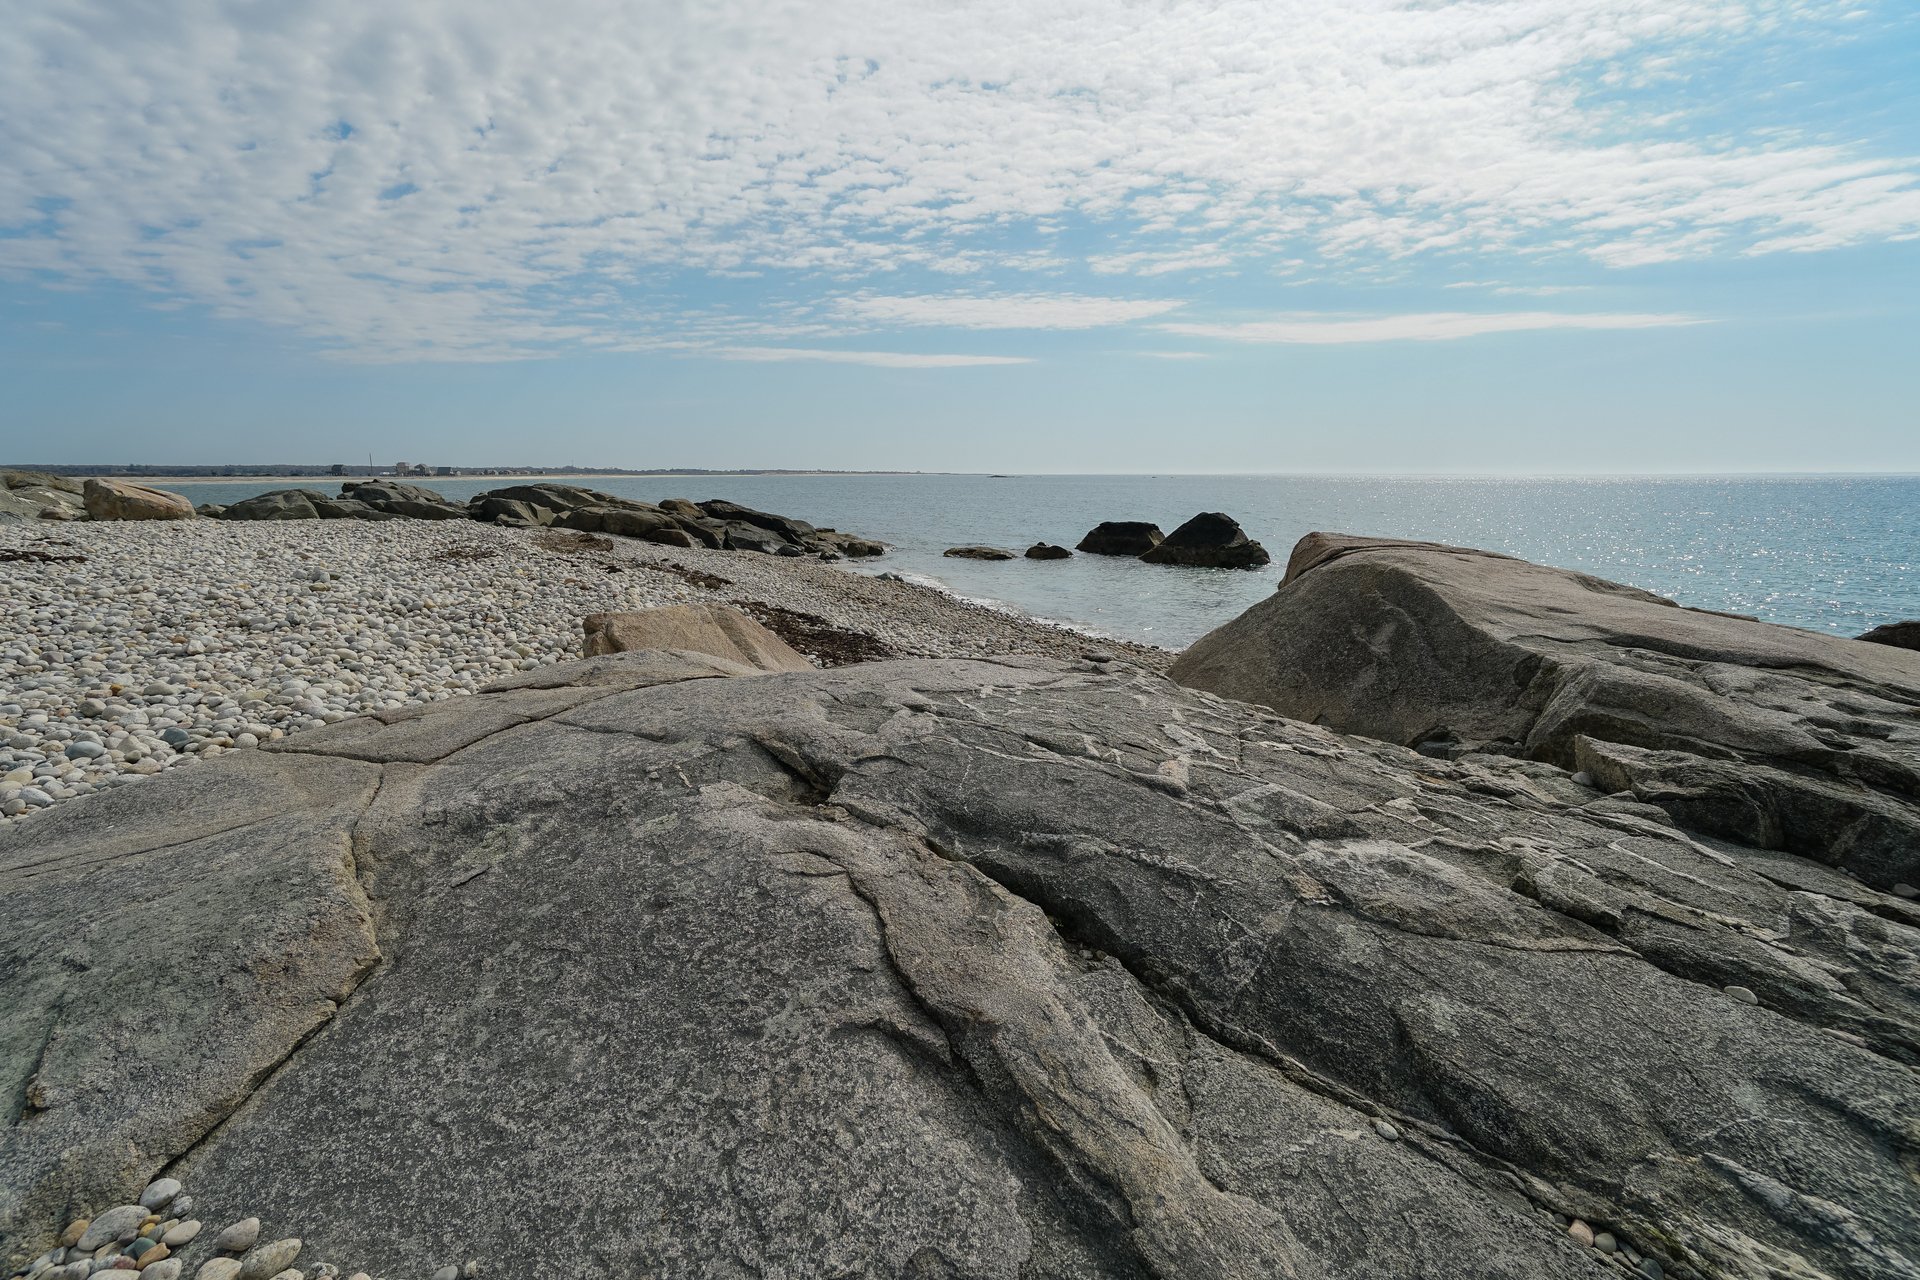 A rocky ledge overlooking the pebble-covered shoreline. Large, sharp rocks stick out of the water.